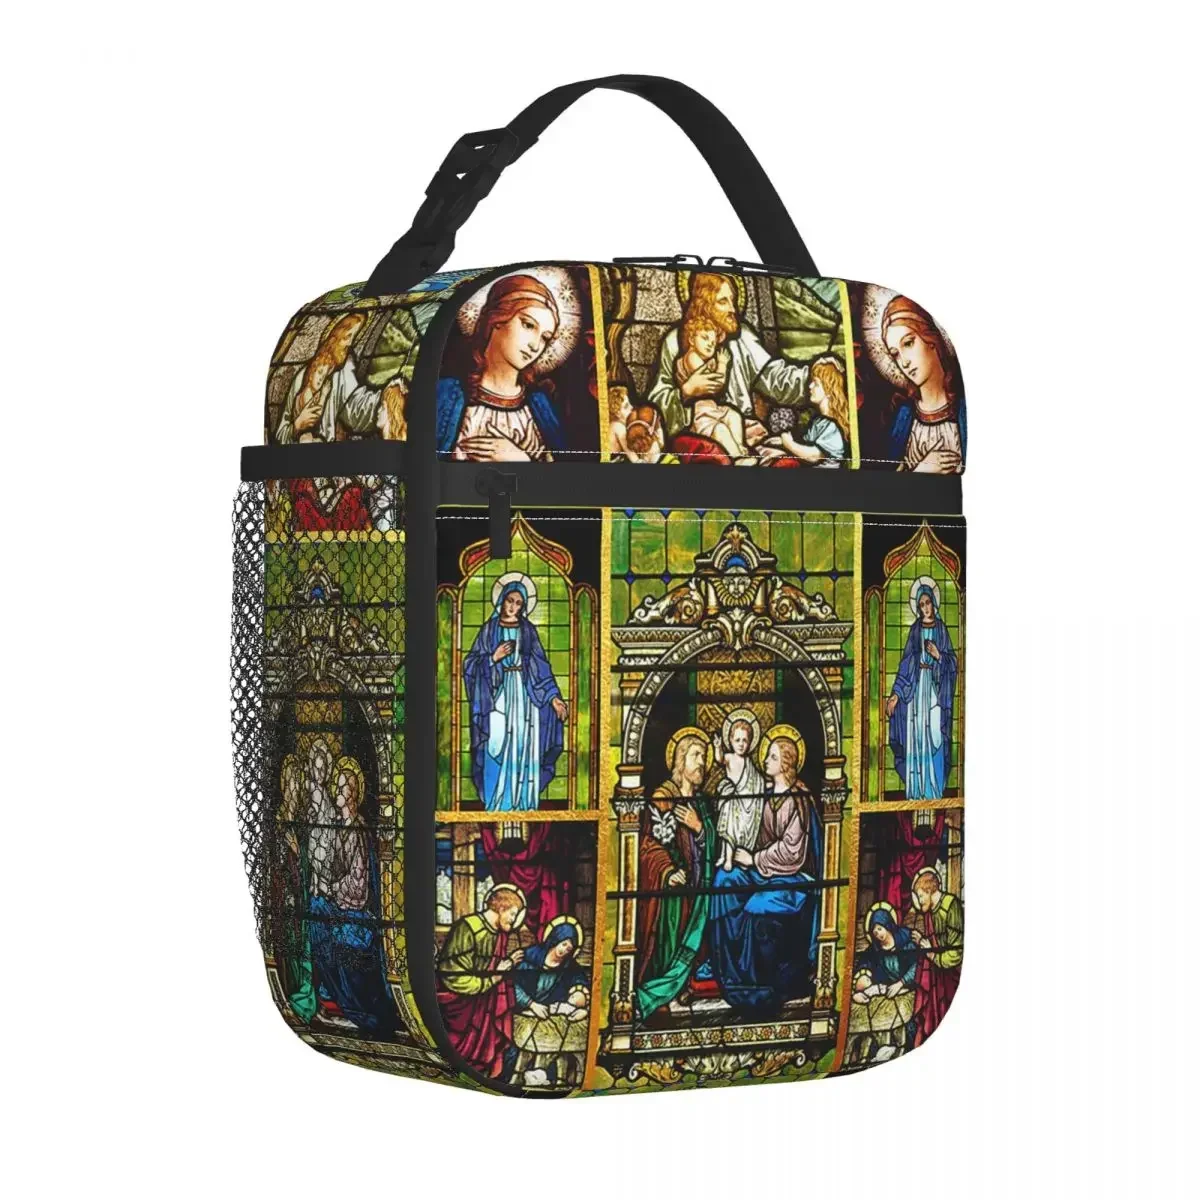 

Our Lady Of Guadalupe Virgin Mary Insulated Lunch Bag Meal Container Thermal Bag Tote Lunch Box Work Outdoor Food Bag